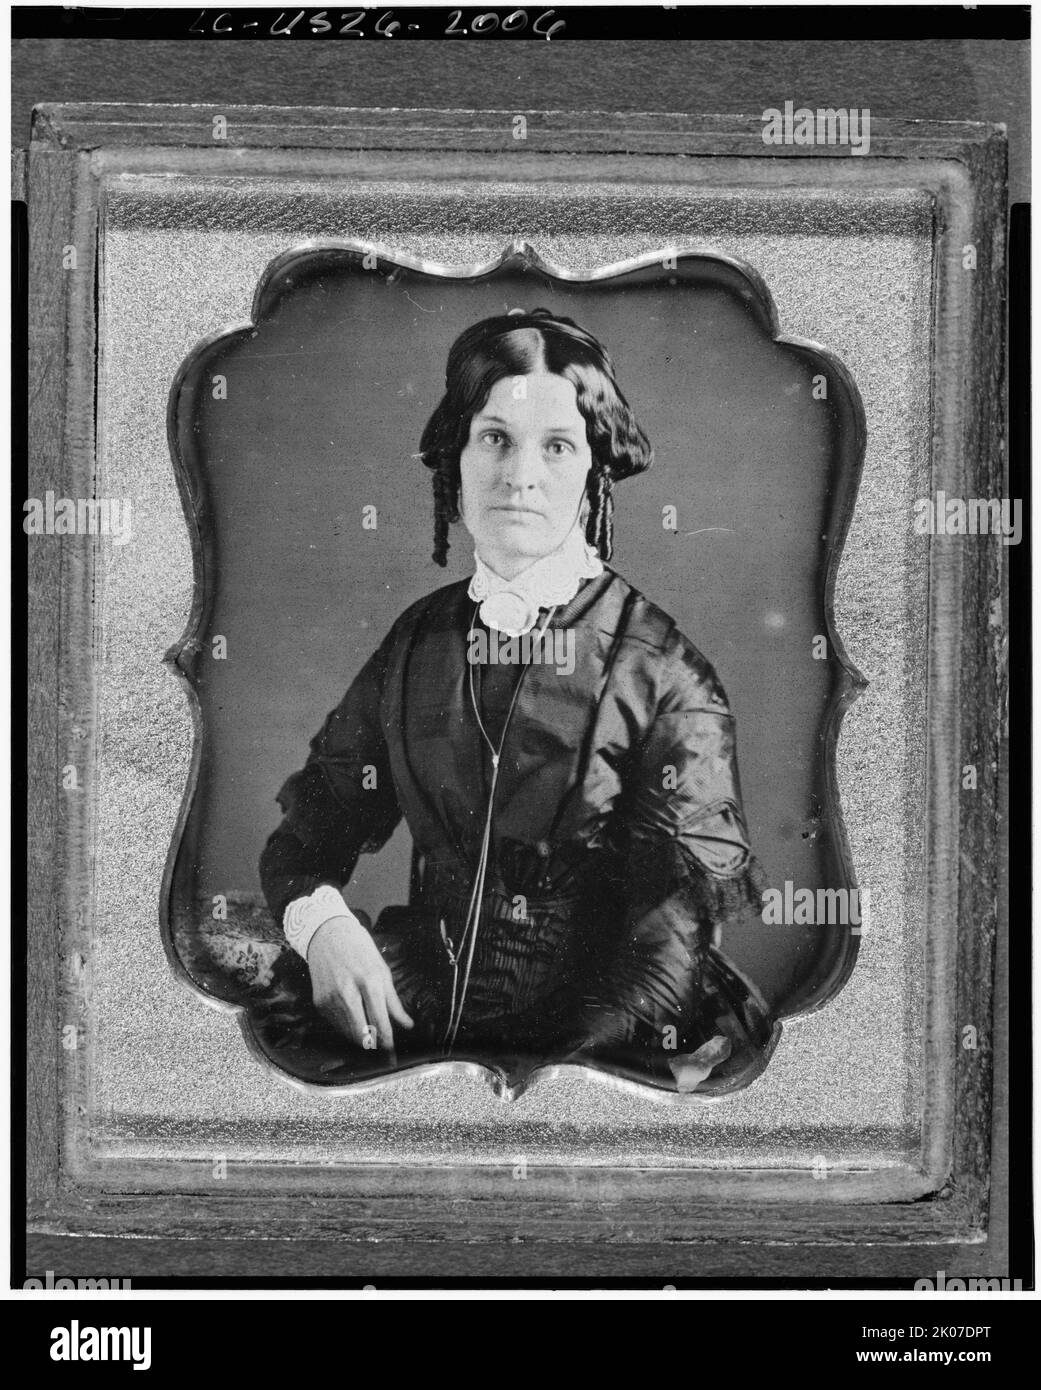 Joannette Clark Benjamin, three-quarter length portrait of a woman, facing front, seated, between 1840 and 1860. Possibly maternal grandmother of photographer Frances Benjamin Johnston. Stock Photo